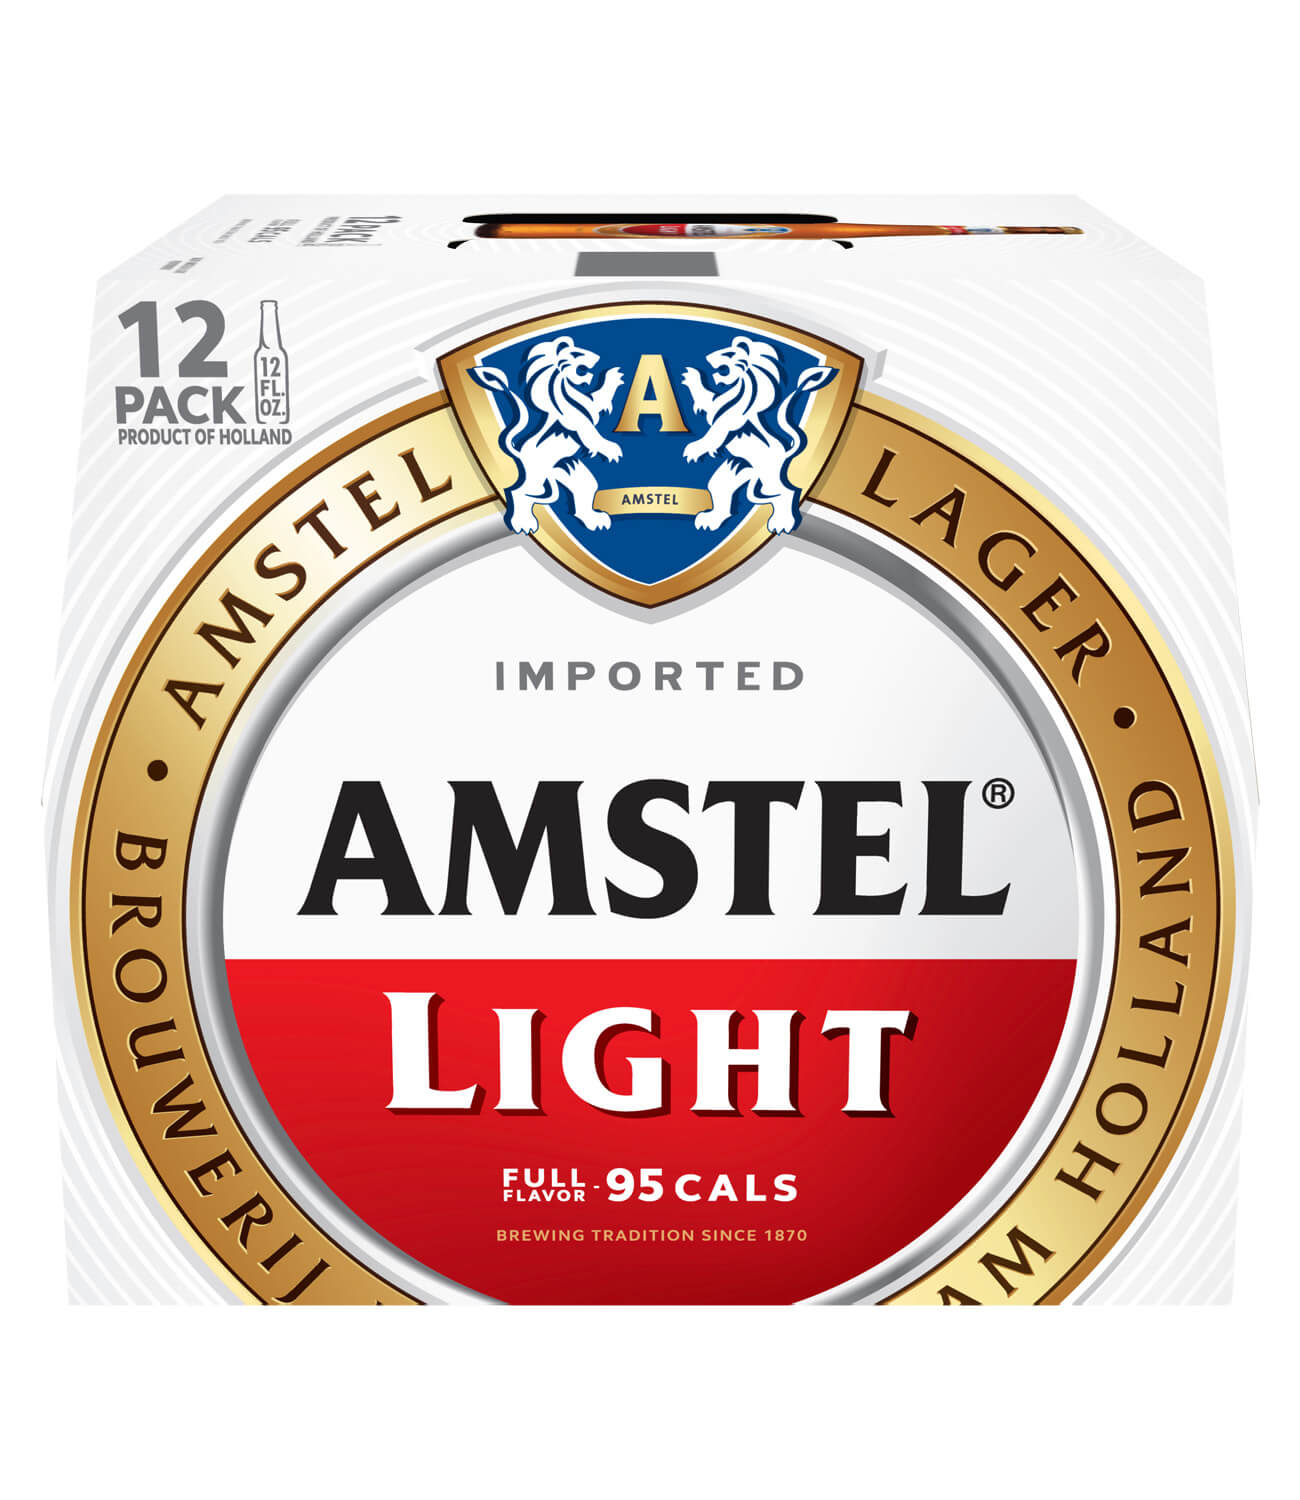 Lot Of 5  Amstel Light Beer coasters..By Amstel of Holland US Freeskiing  2004 